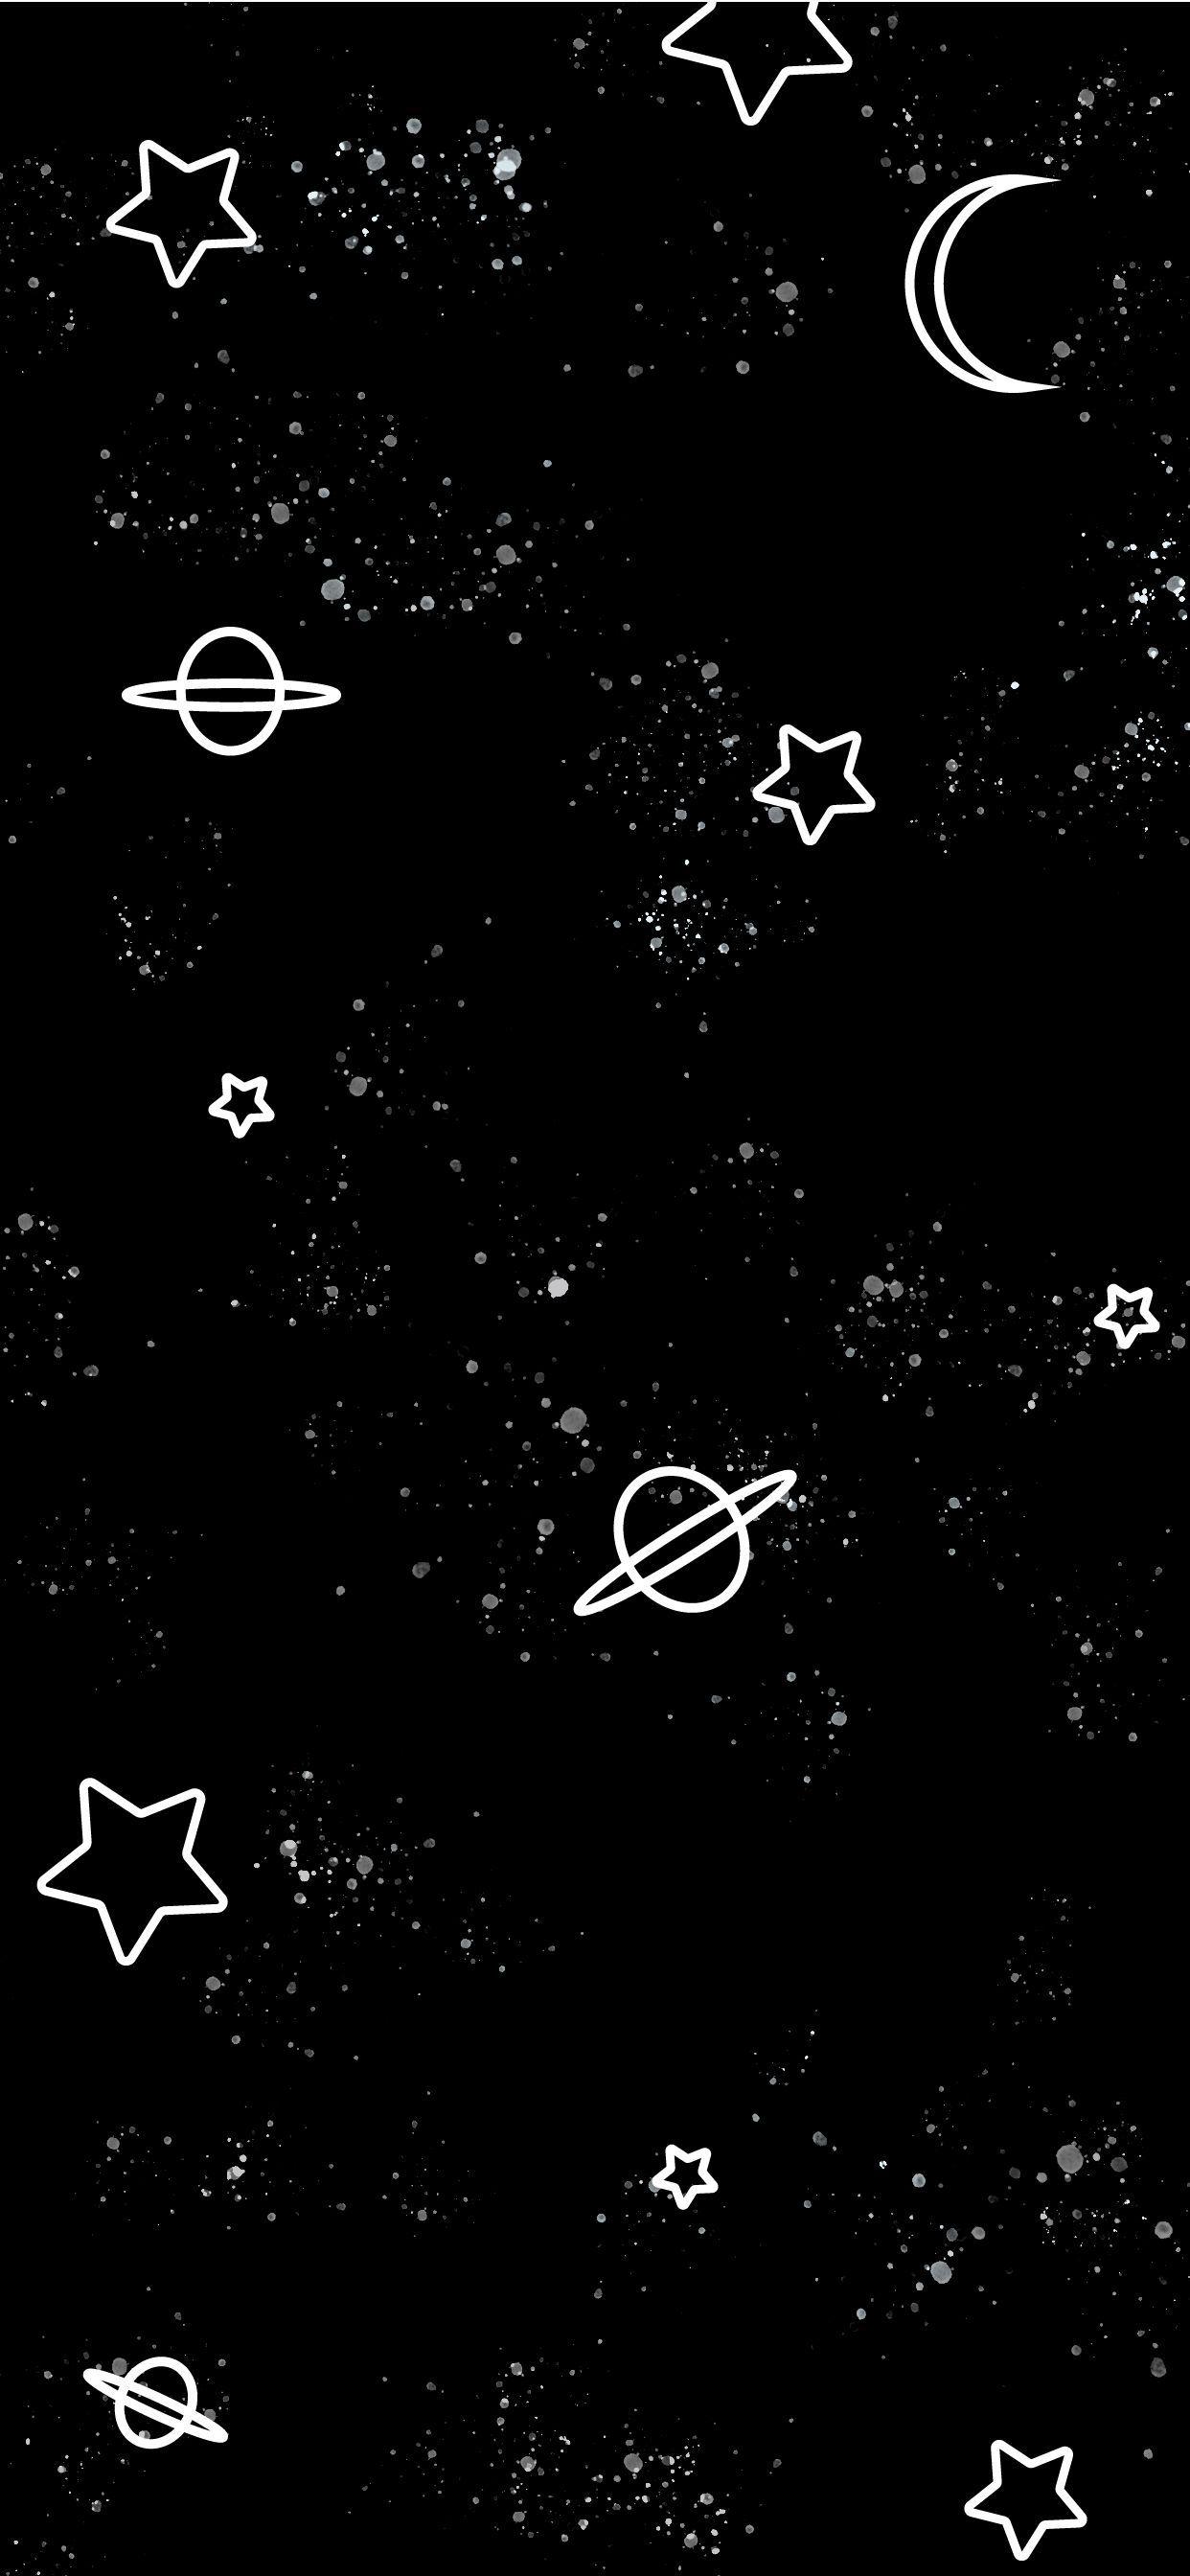 Black and White Space Wallpapers - Top Free Black and White Space